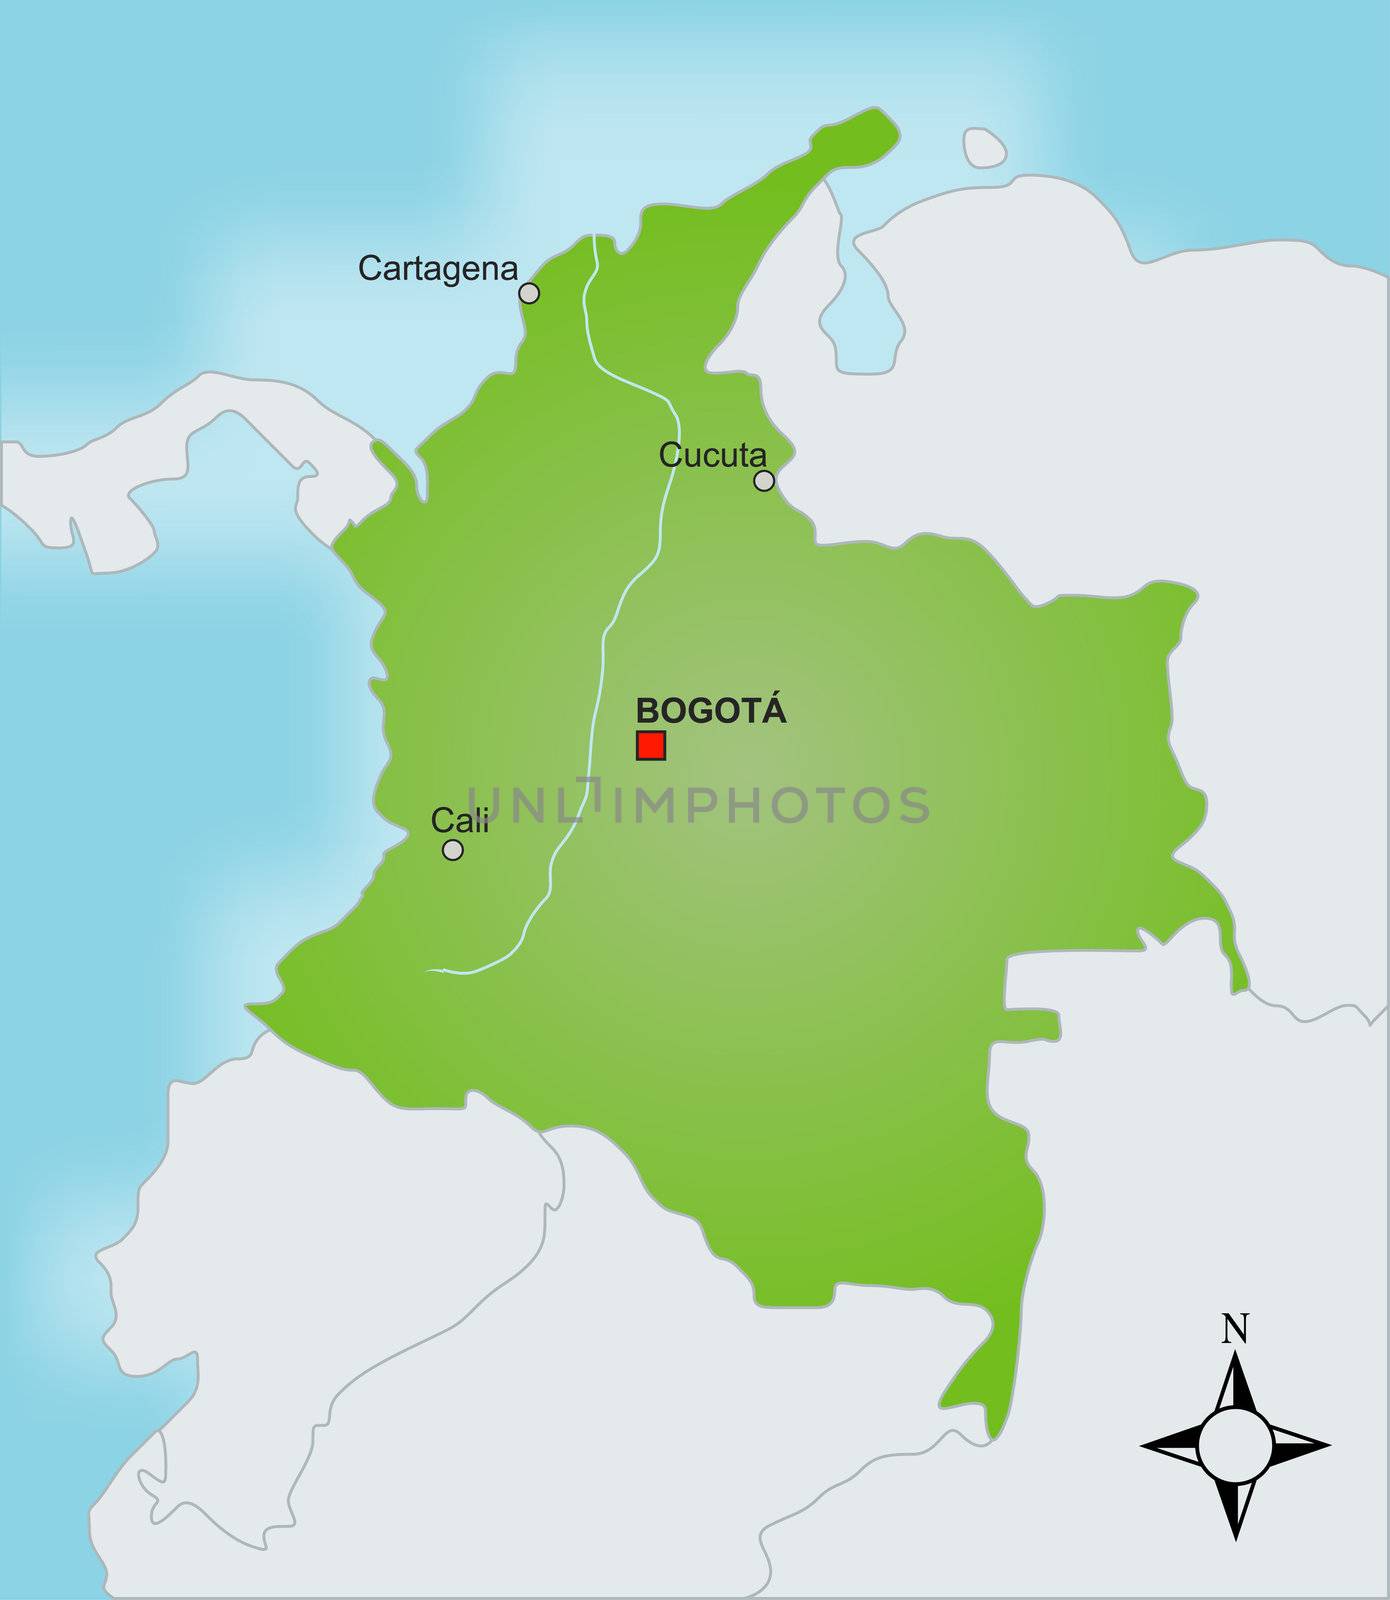 A stylized map of Colombia showing different cities and nearby countries.